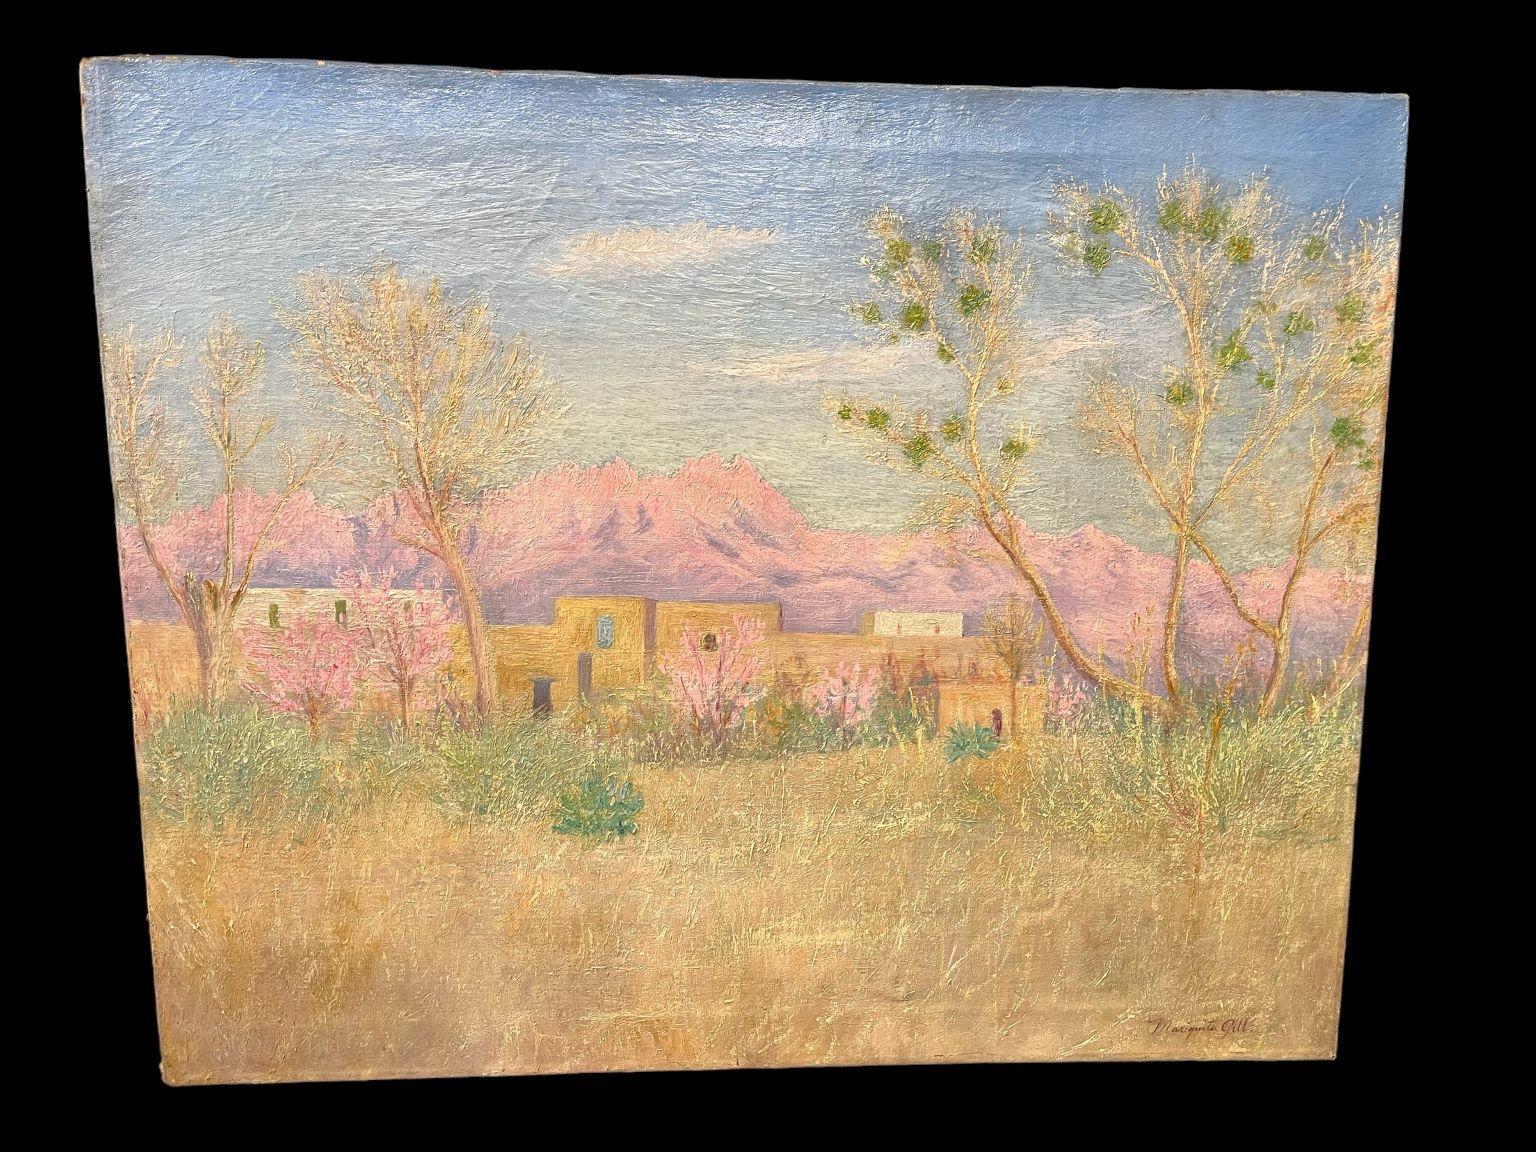  Remarkable Impressionist painting by Mariquita Gill Circa 1900’s oil on canvas. Beautiful painting of the American South West. Painting is signed on the bottom right-hand corner. Dimensions 32 inches wide by 26 inches high and 1 inch deep.

      